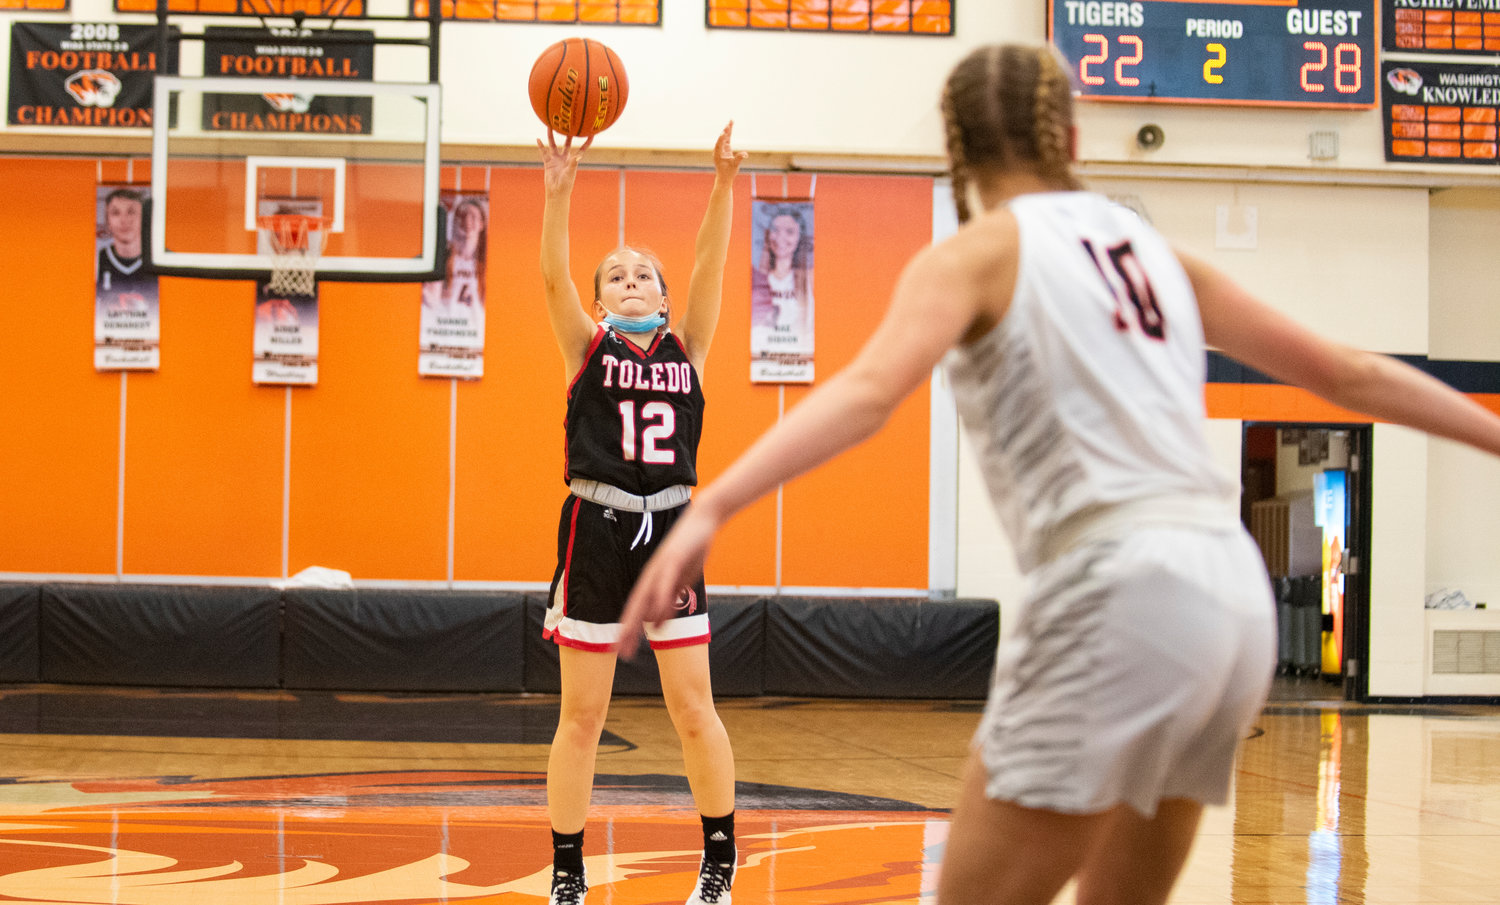 Toledo senior Gracie Madill (12) shoots a wide-open 3-pointer on the road at Napavine on Monday.